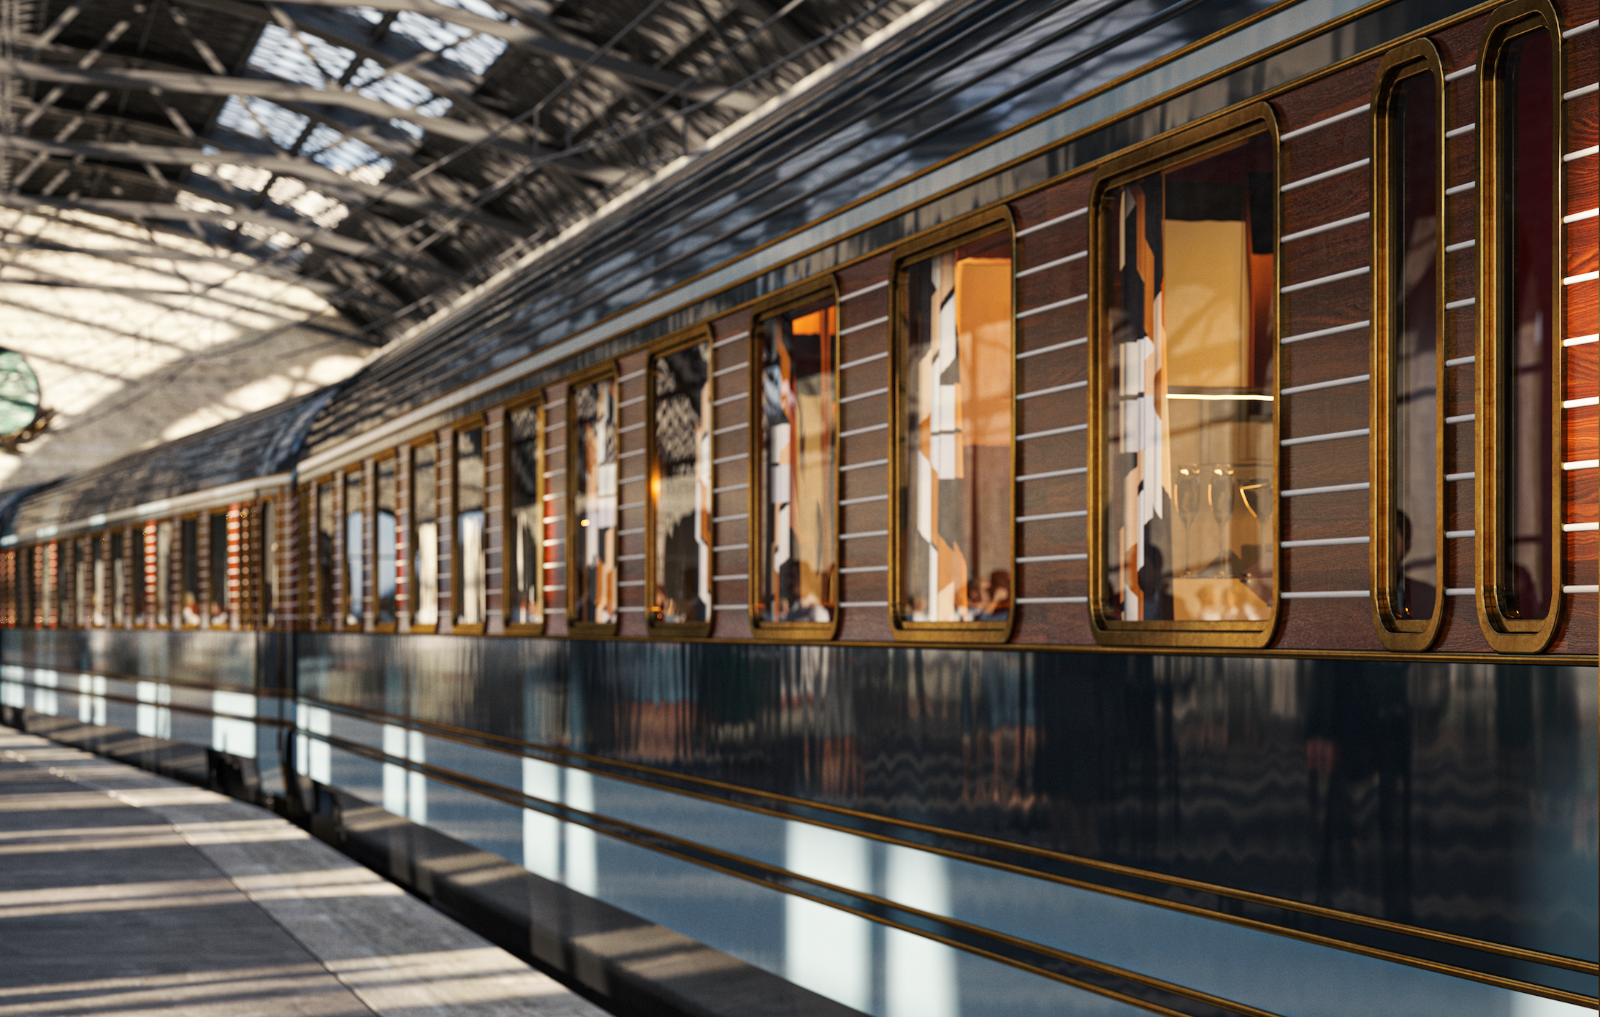 Orient Express travel brand is back on track